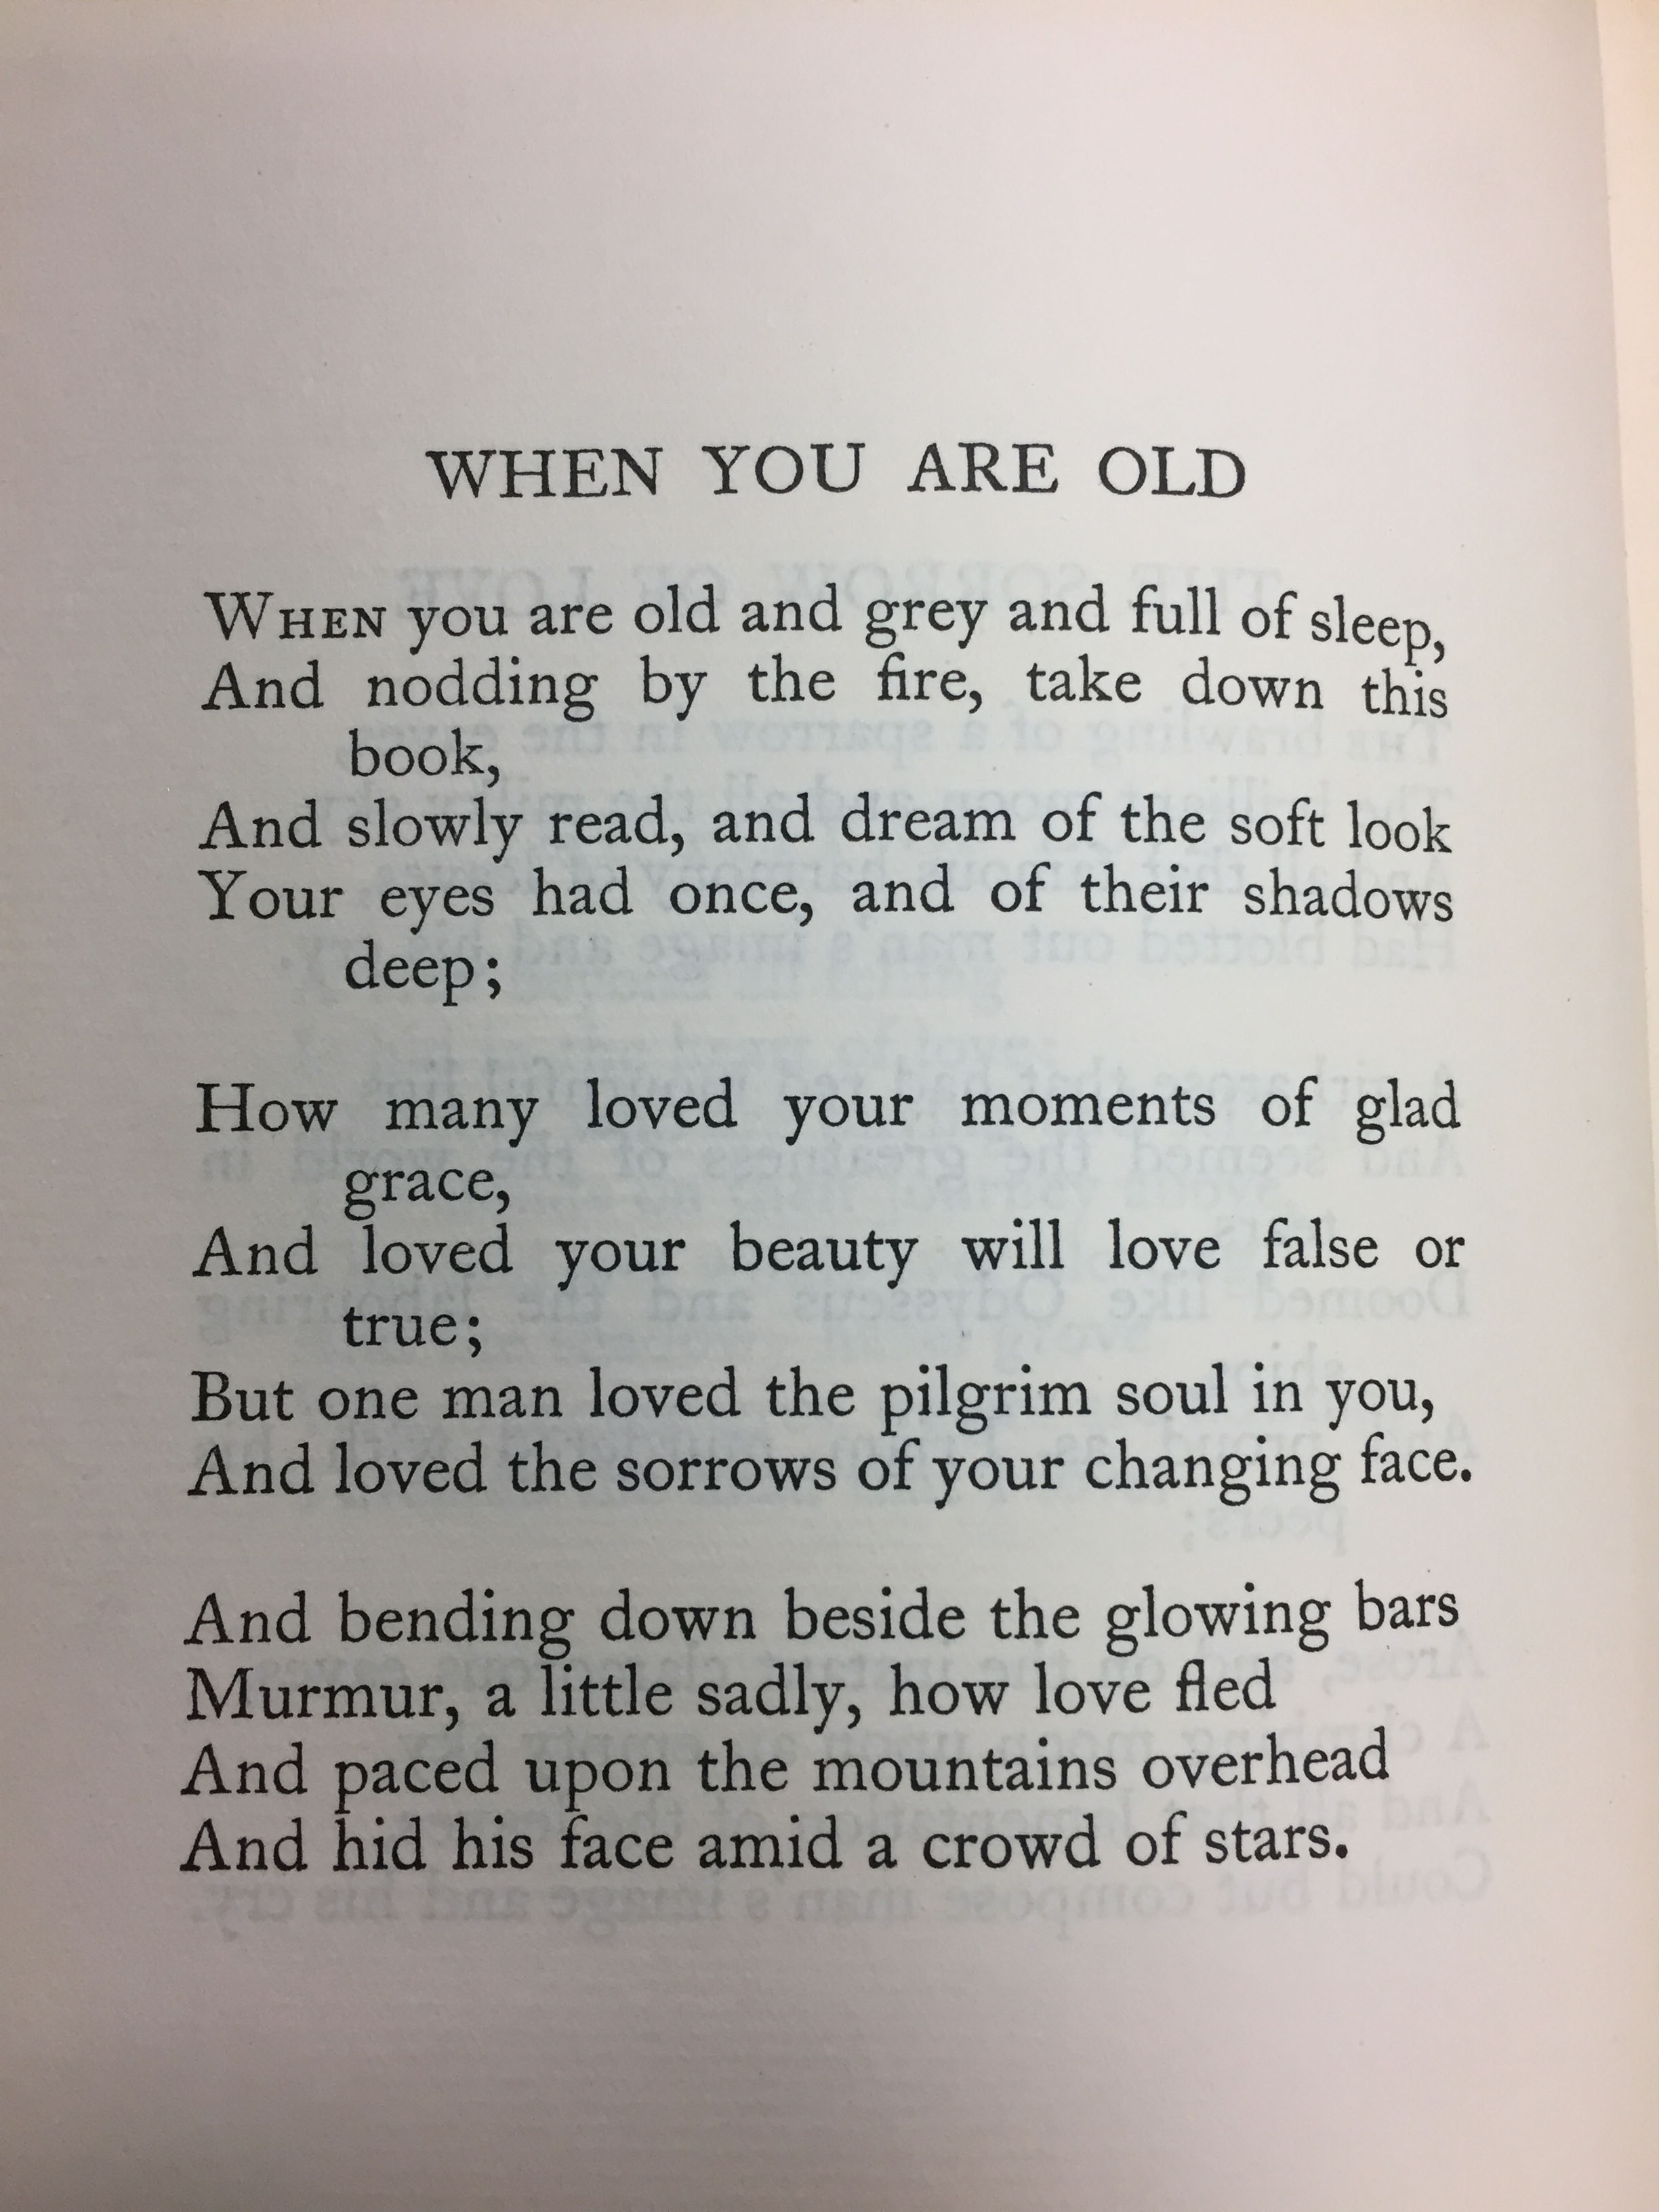 Revised version of the poem, "When You Are Old," as it appears in W. B. Yeats, Collected Works in Verse and Prose (Stratford-on-Avon: Shakespeare Head Press, 1908) (PR5900 .A3 1908 v.1). Note the changes in the last stanza.